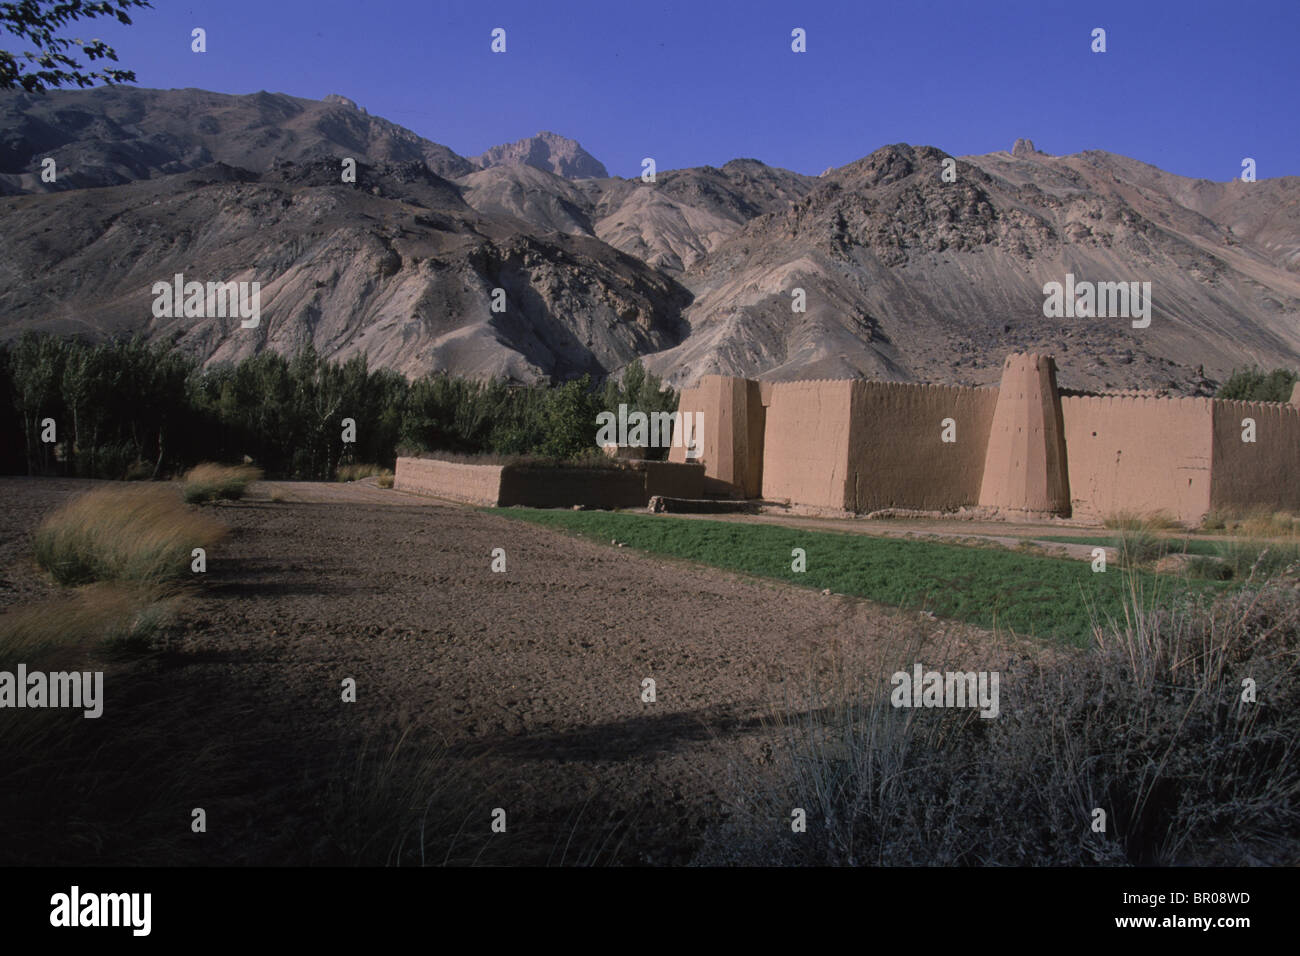 A walled family compound sits below rocky hills, in the Hazarajat, Bamiyan Stock Photo